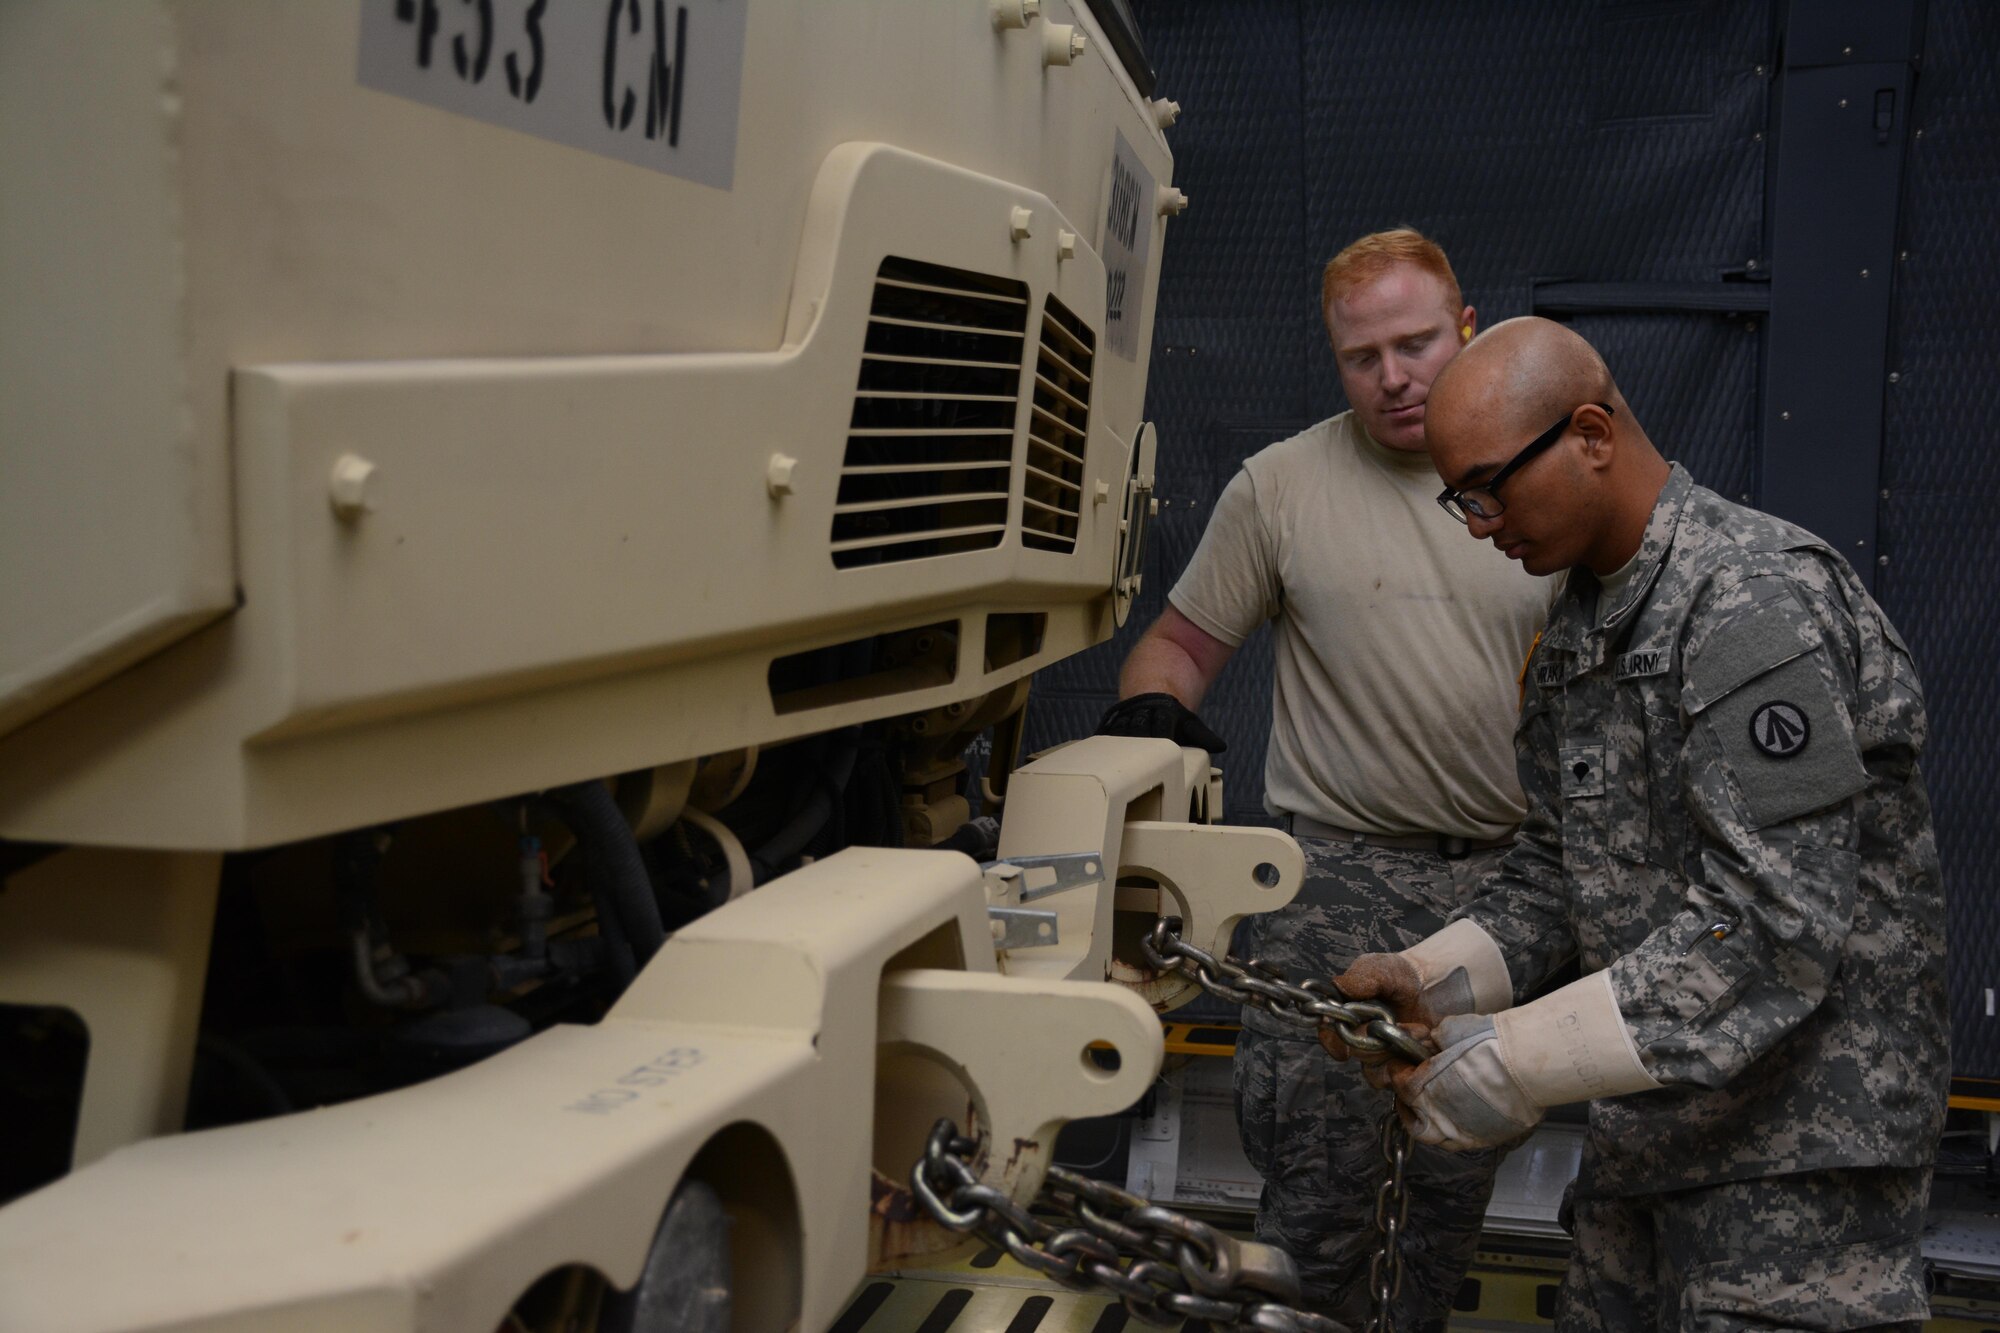 Senior Airman Joshua Thomas, 55th Aerial Port Squadron, trains Army Specialist Mijjal Tamrakar on how to secure a Light Medium Tactical Vehicle June 18, 2016. The training took place during a larger Rodeo event hosted by the 45th APS on Travis Air Force Base.  (U.S. Air Force photos/Staff Sgt. Madelyn Brown)